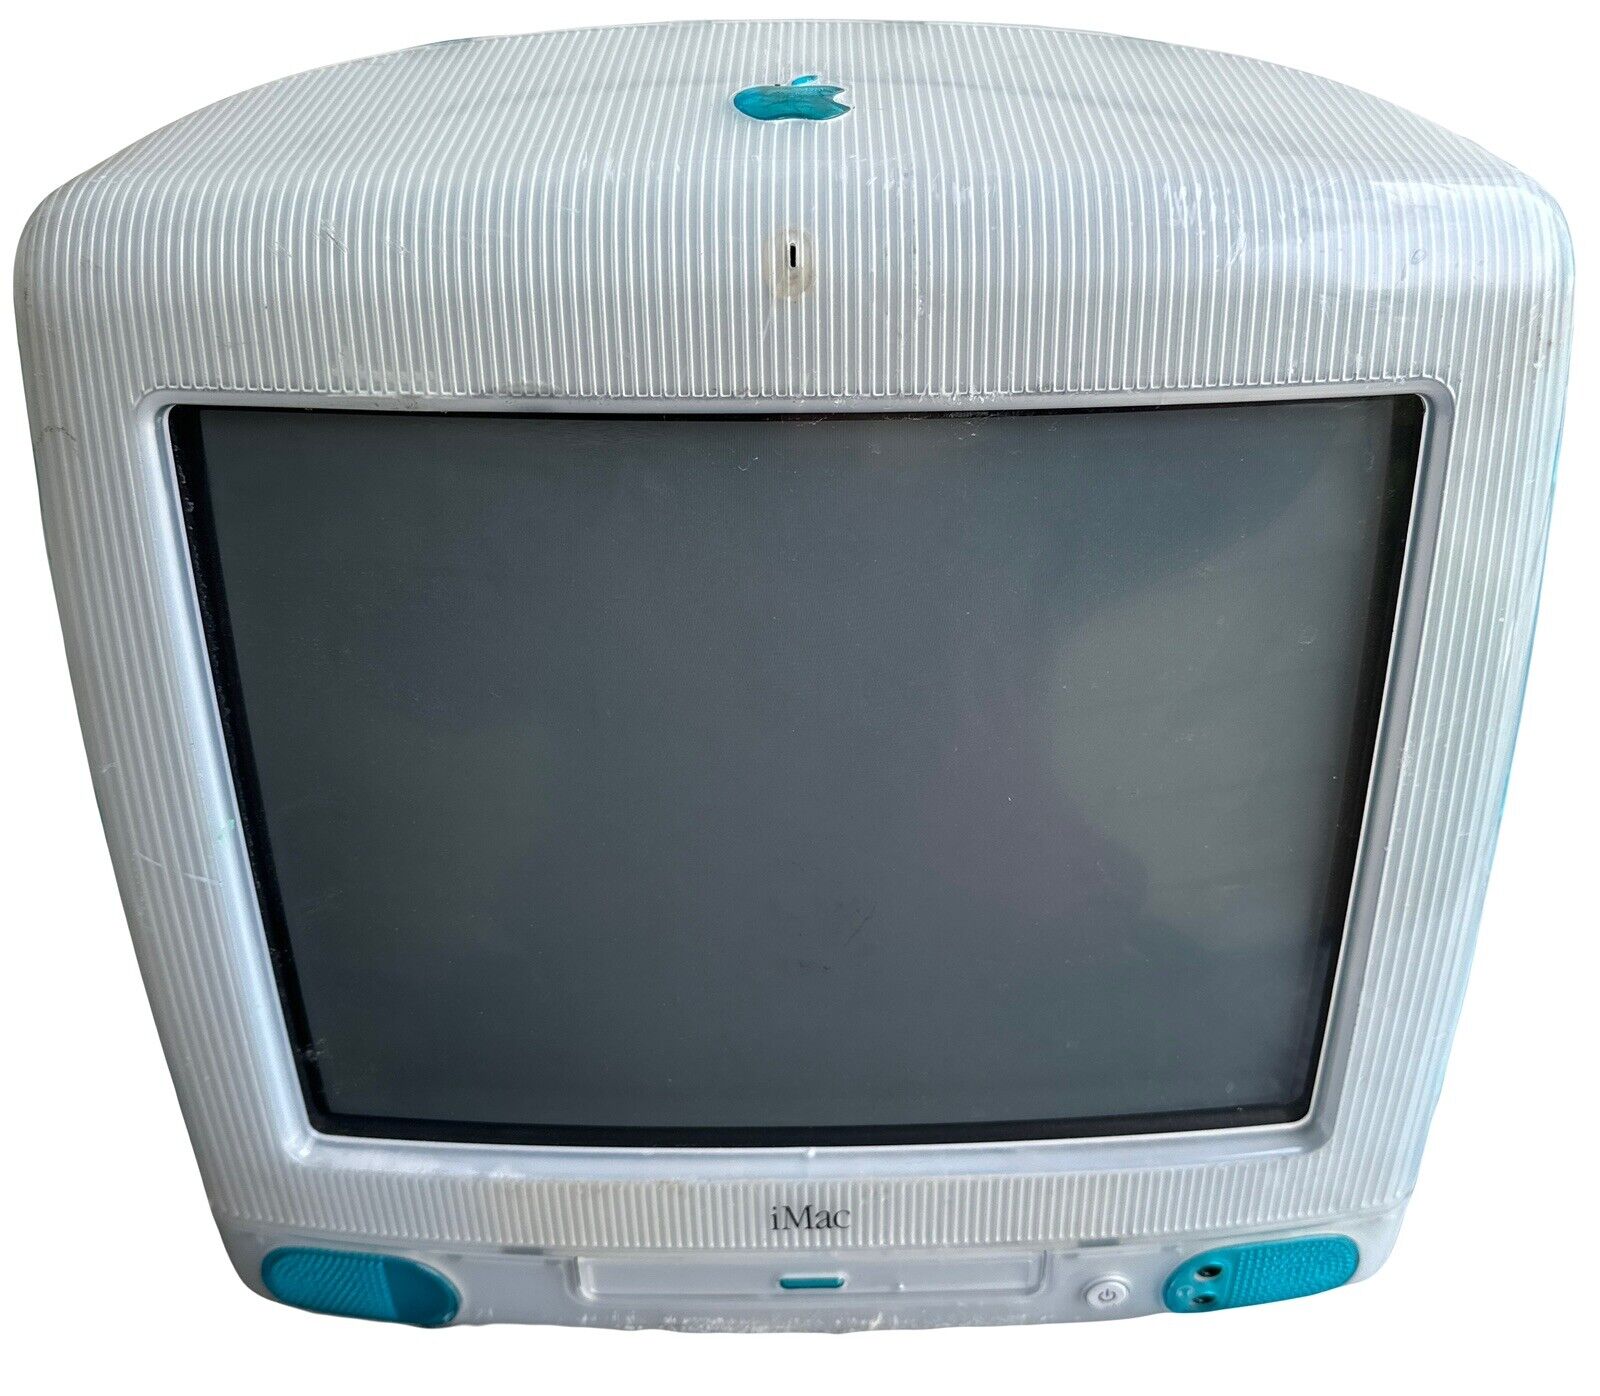 Apple iMac G3 333MHz 32MB 1999 Blueberry Vintage Computer M7440LL/A - UNTESTED